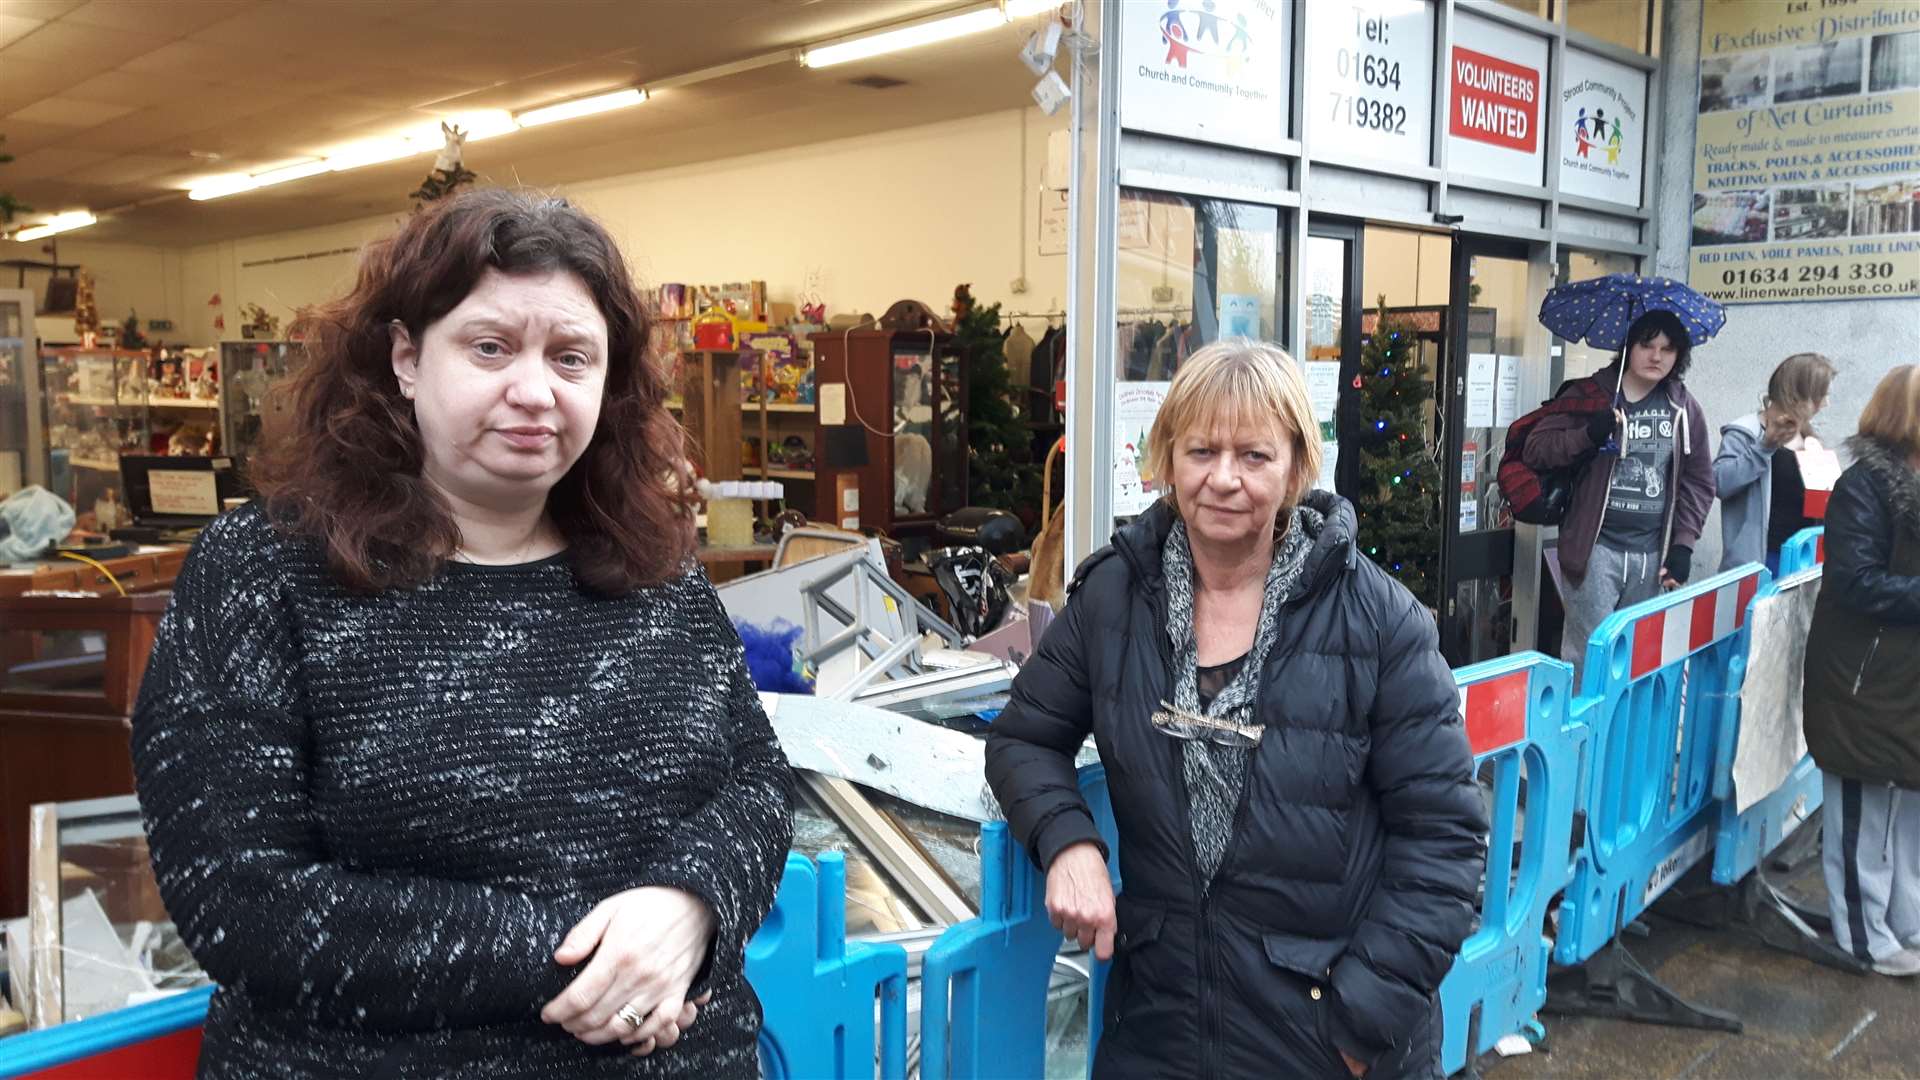 Managers Kim West (right) and Karen Payne outside the smashed shop front